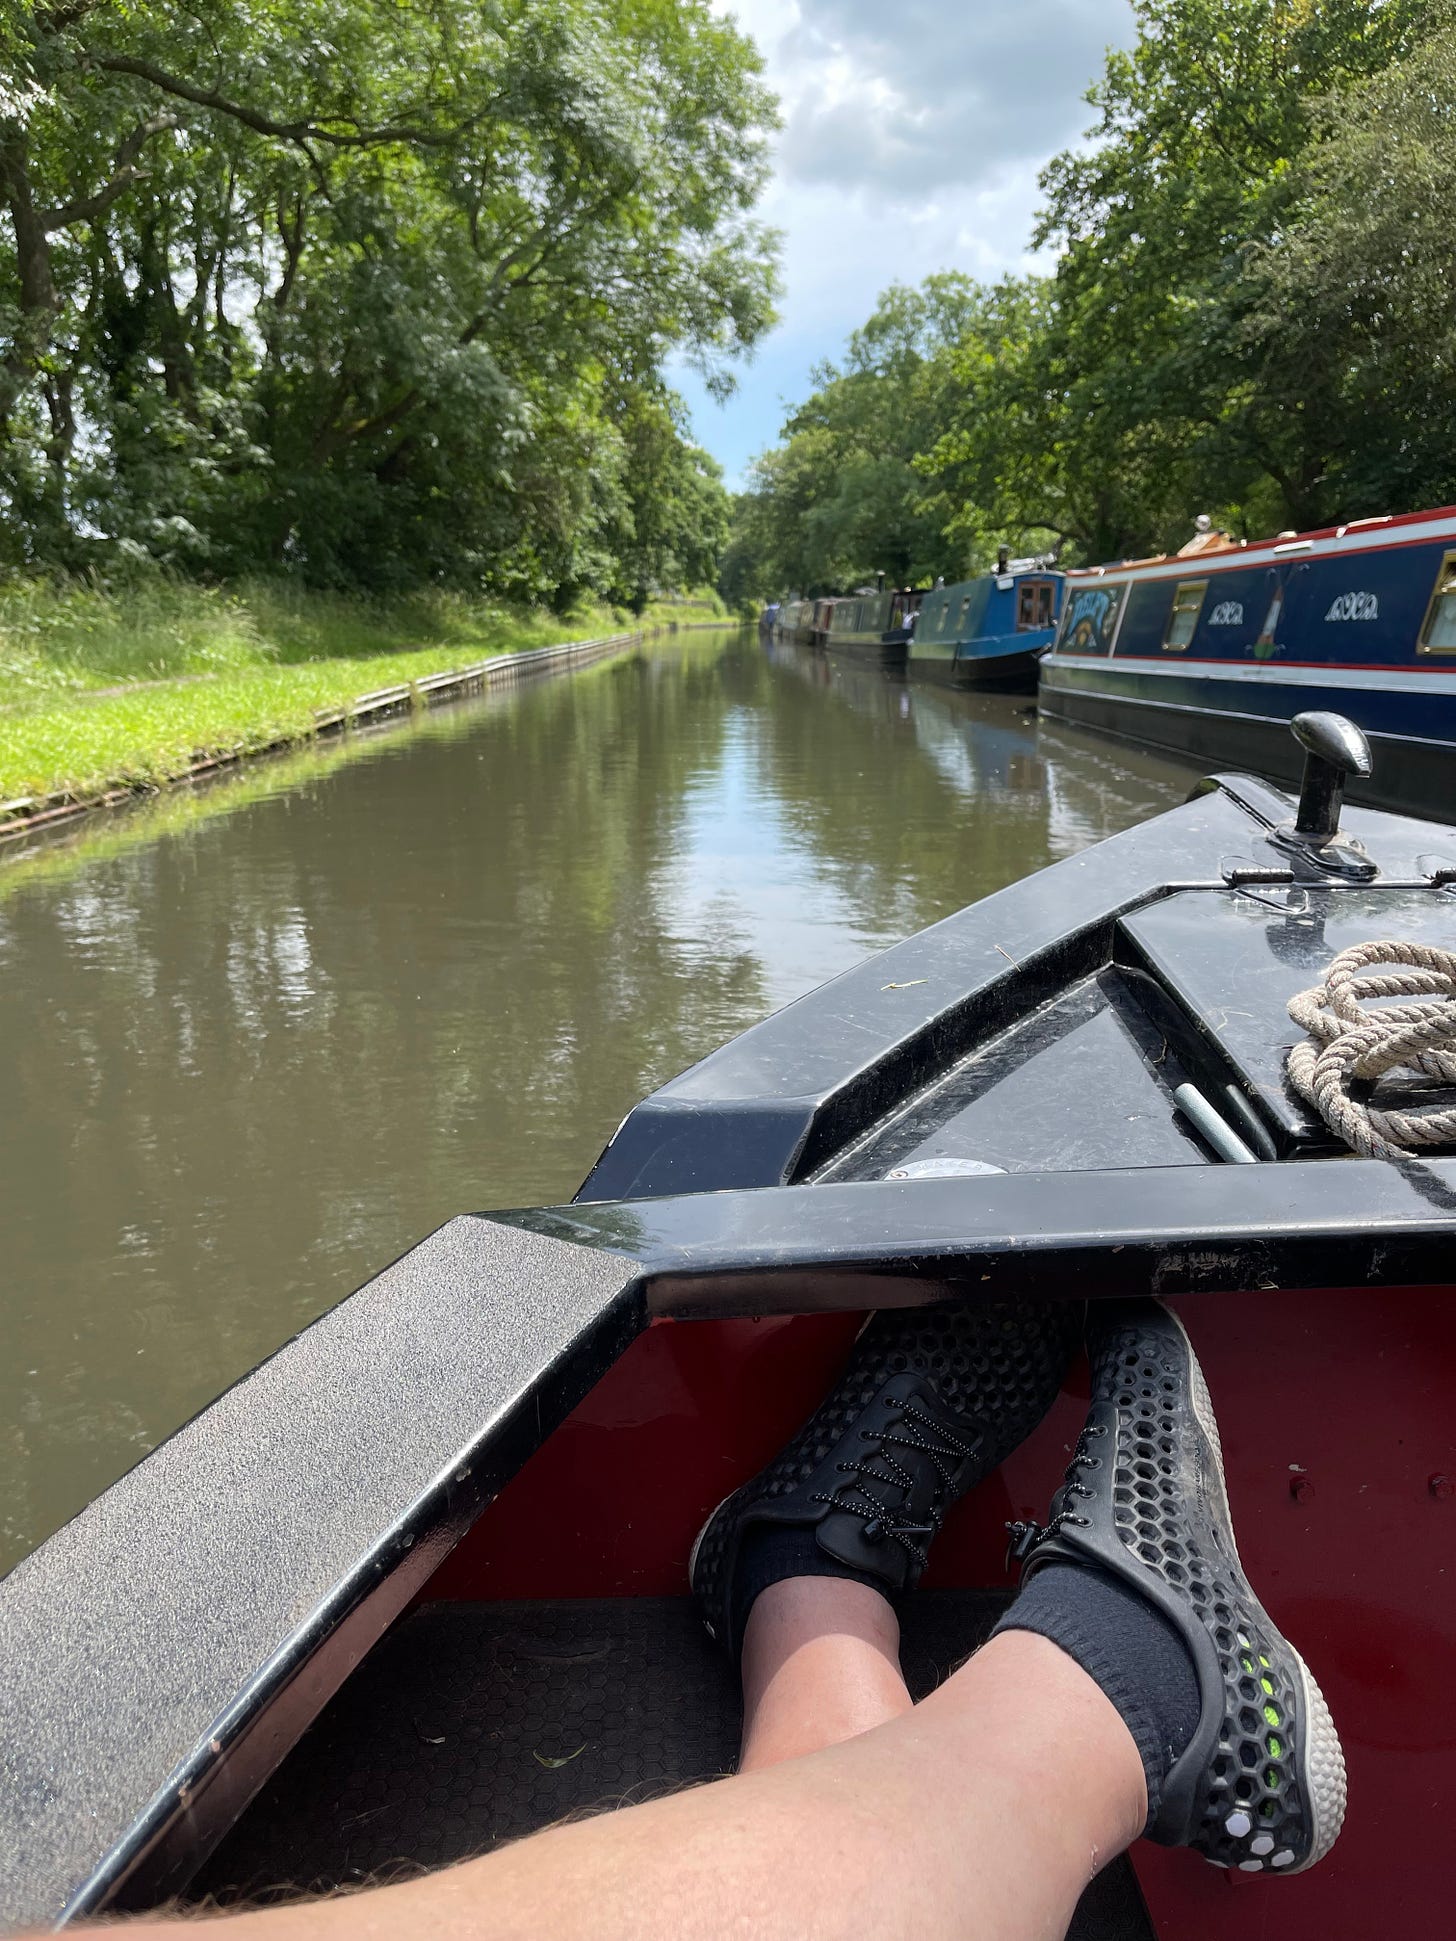 Lazing on the canal boat